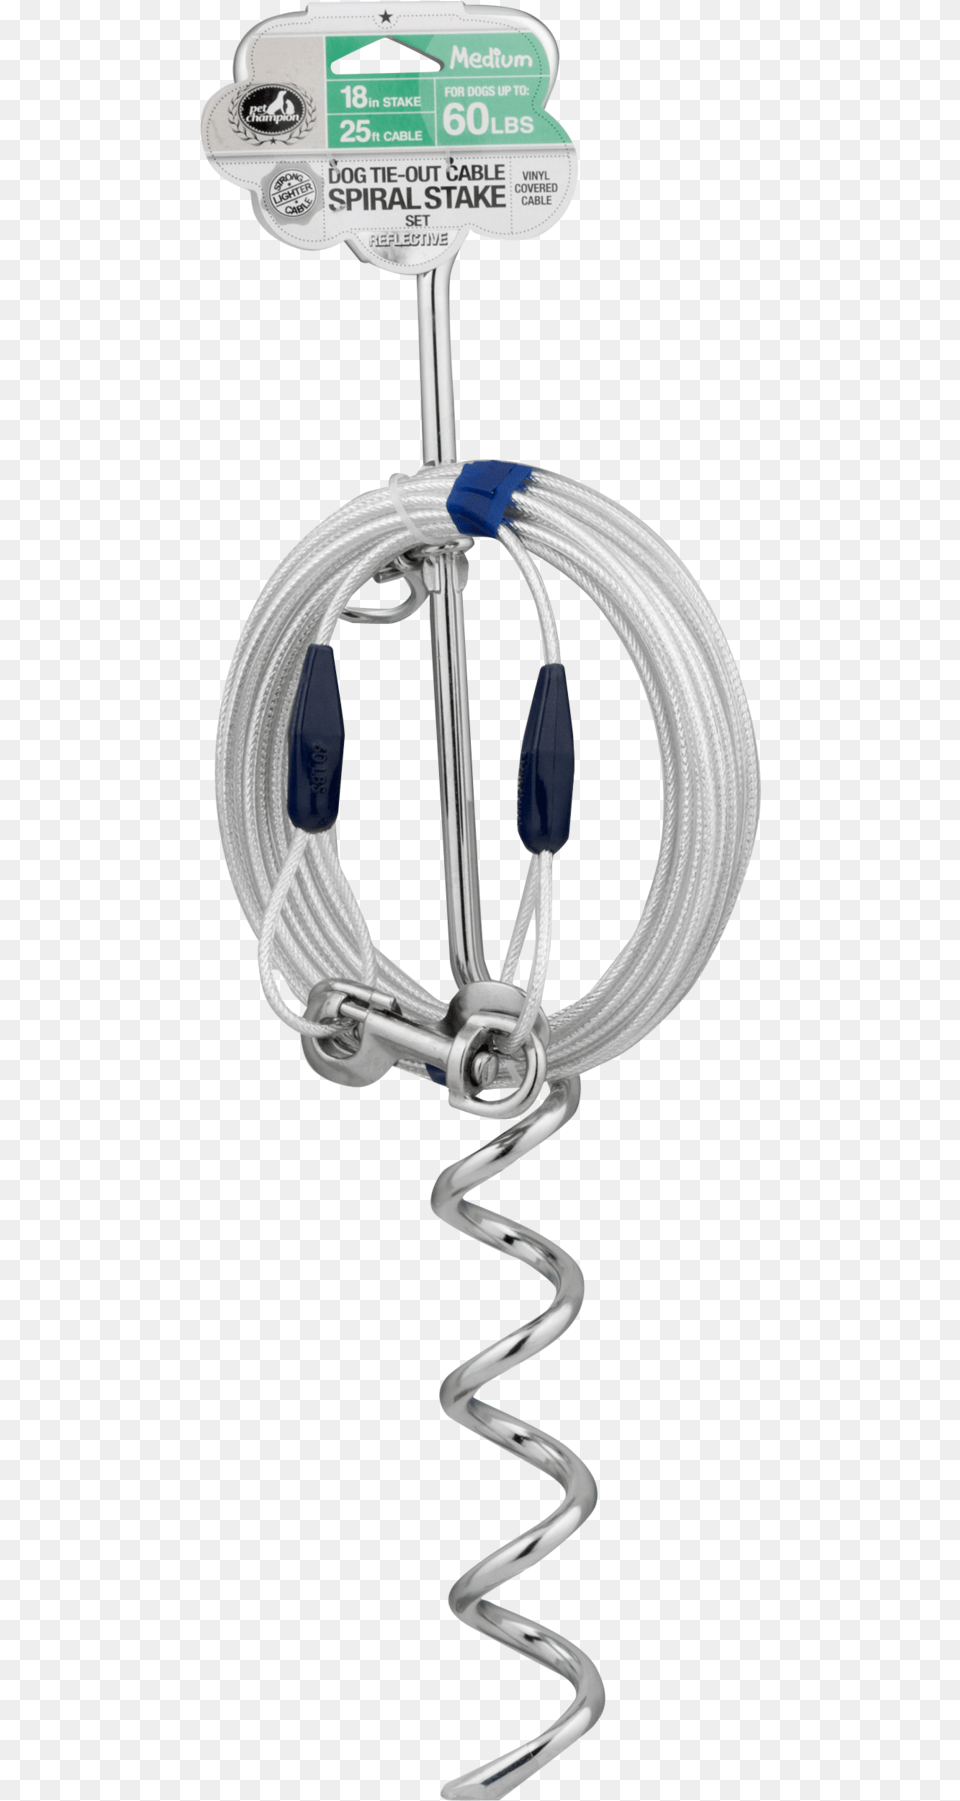 Pet Champion Dog Tie Out Cable Spiral Stake Set 2539 Locket, Coil Free Png Download